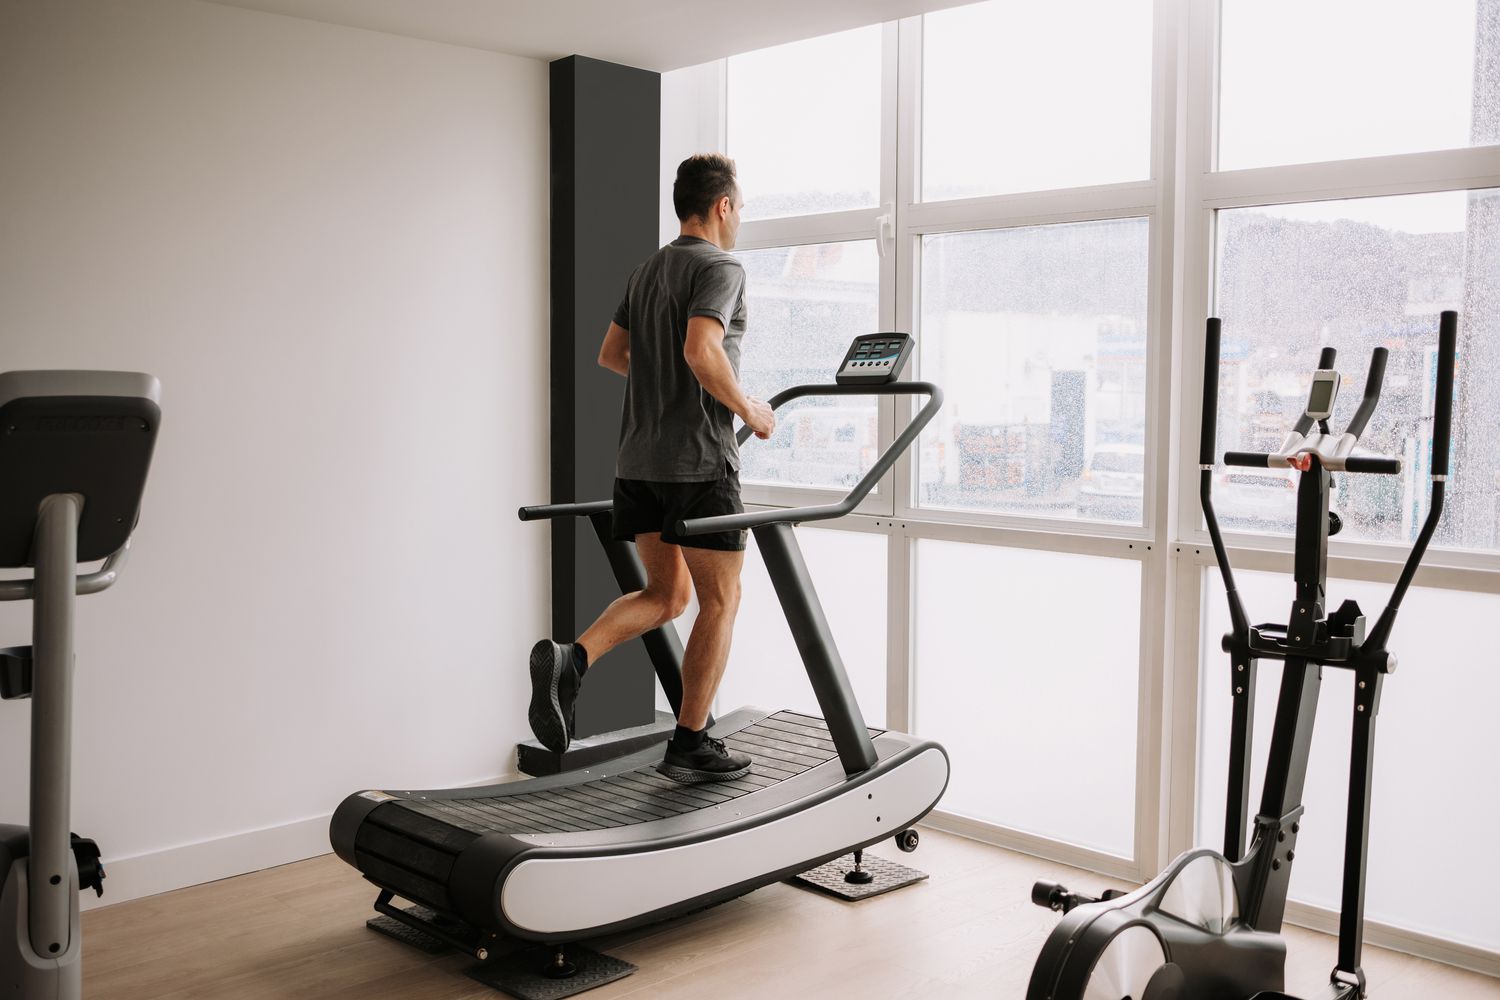 Top 5 Best Online Stores to Buy Treadmills for Home and Gym